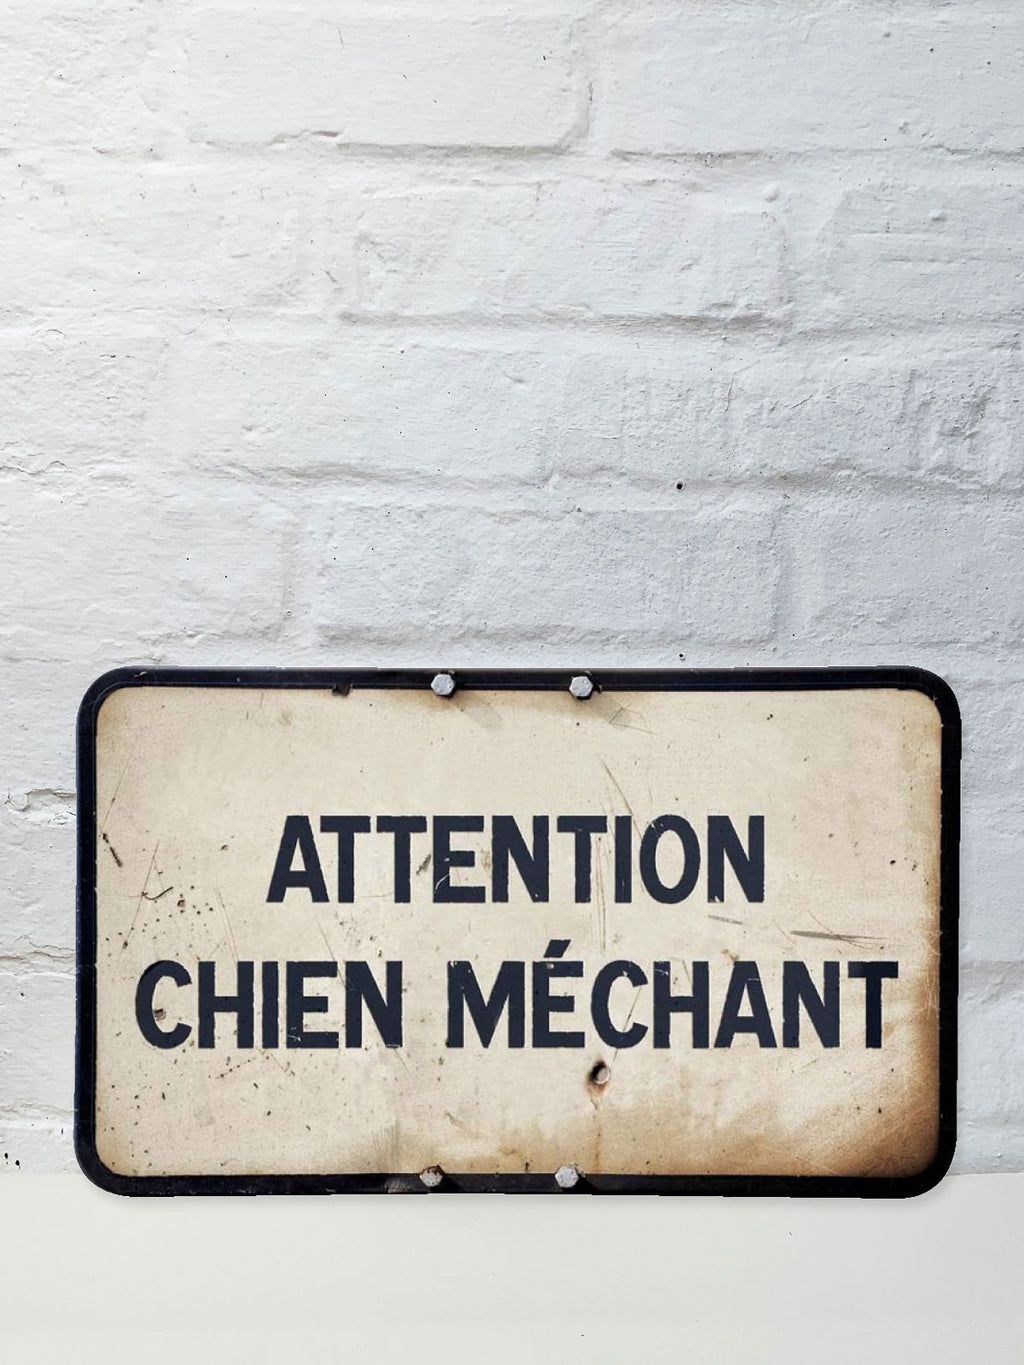 Koziel Cut Out - Attention chien mechant / Beware of the dog